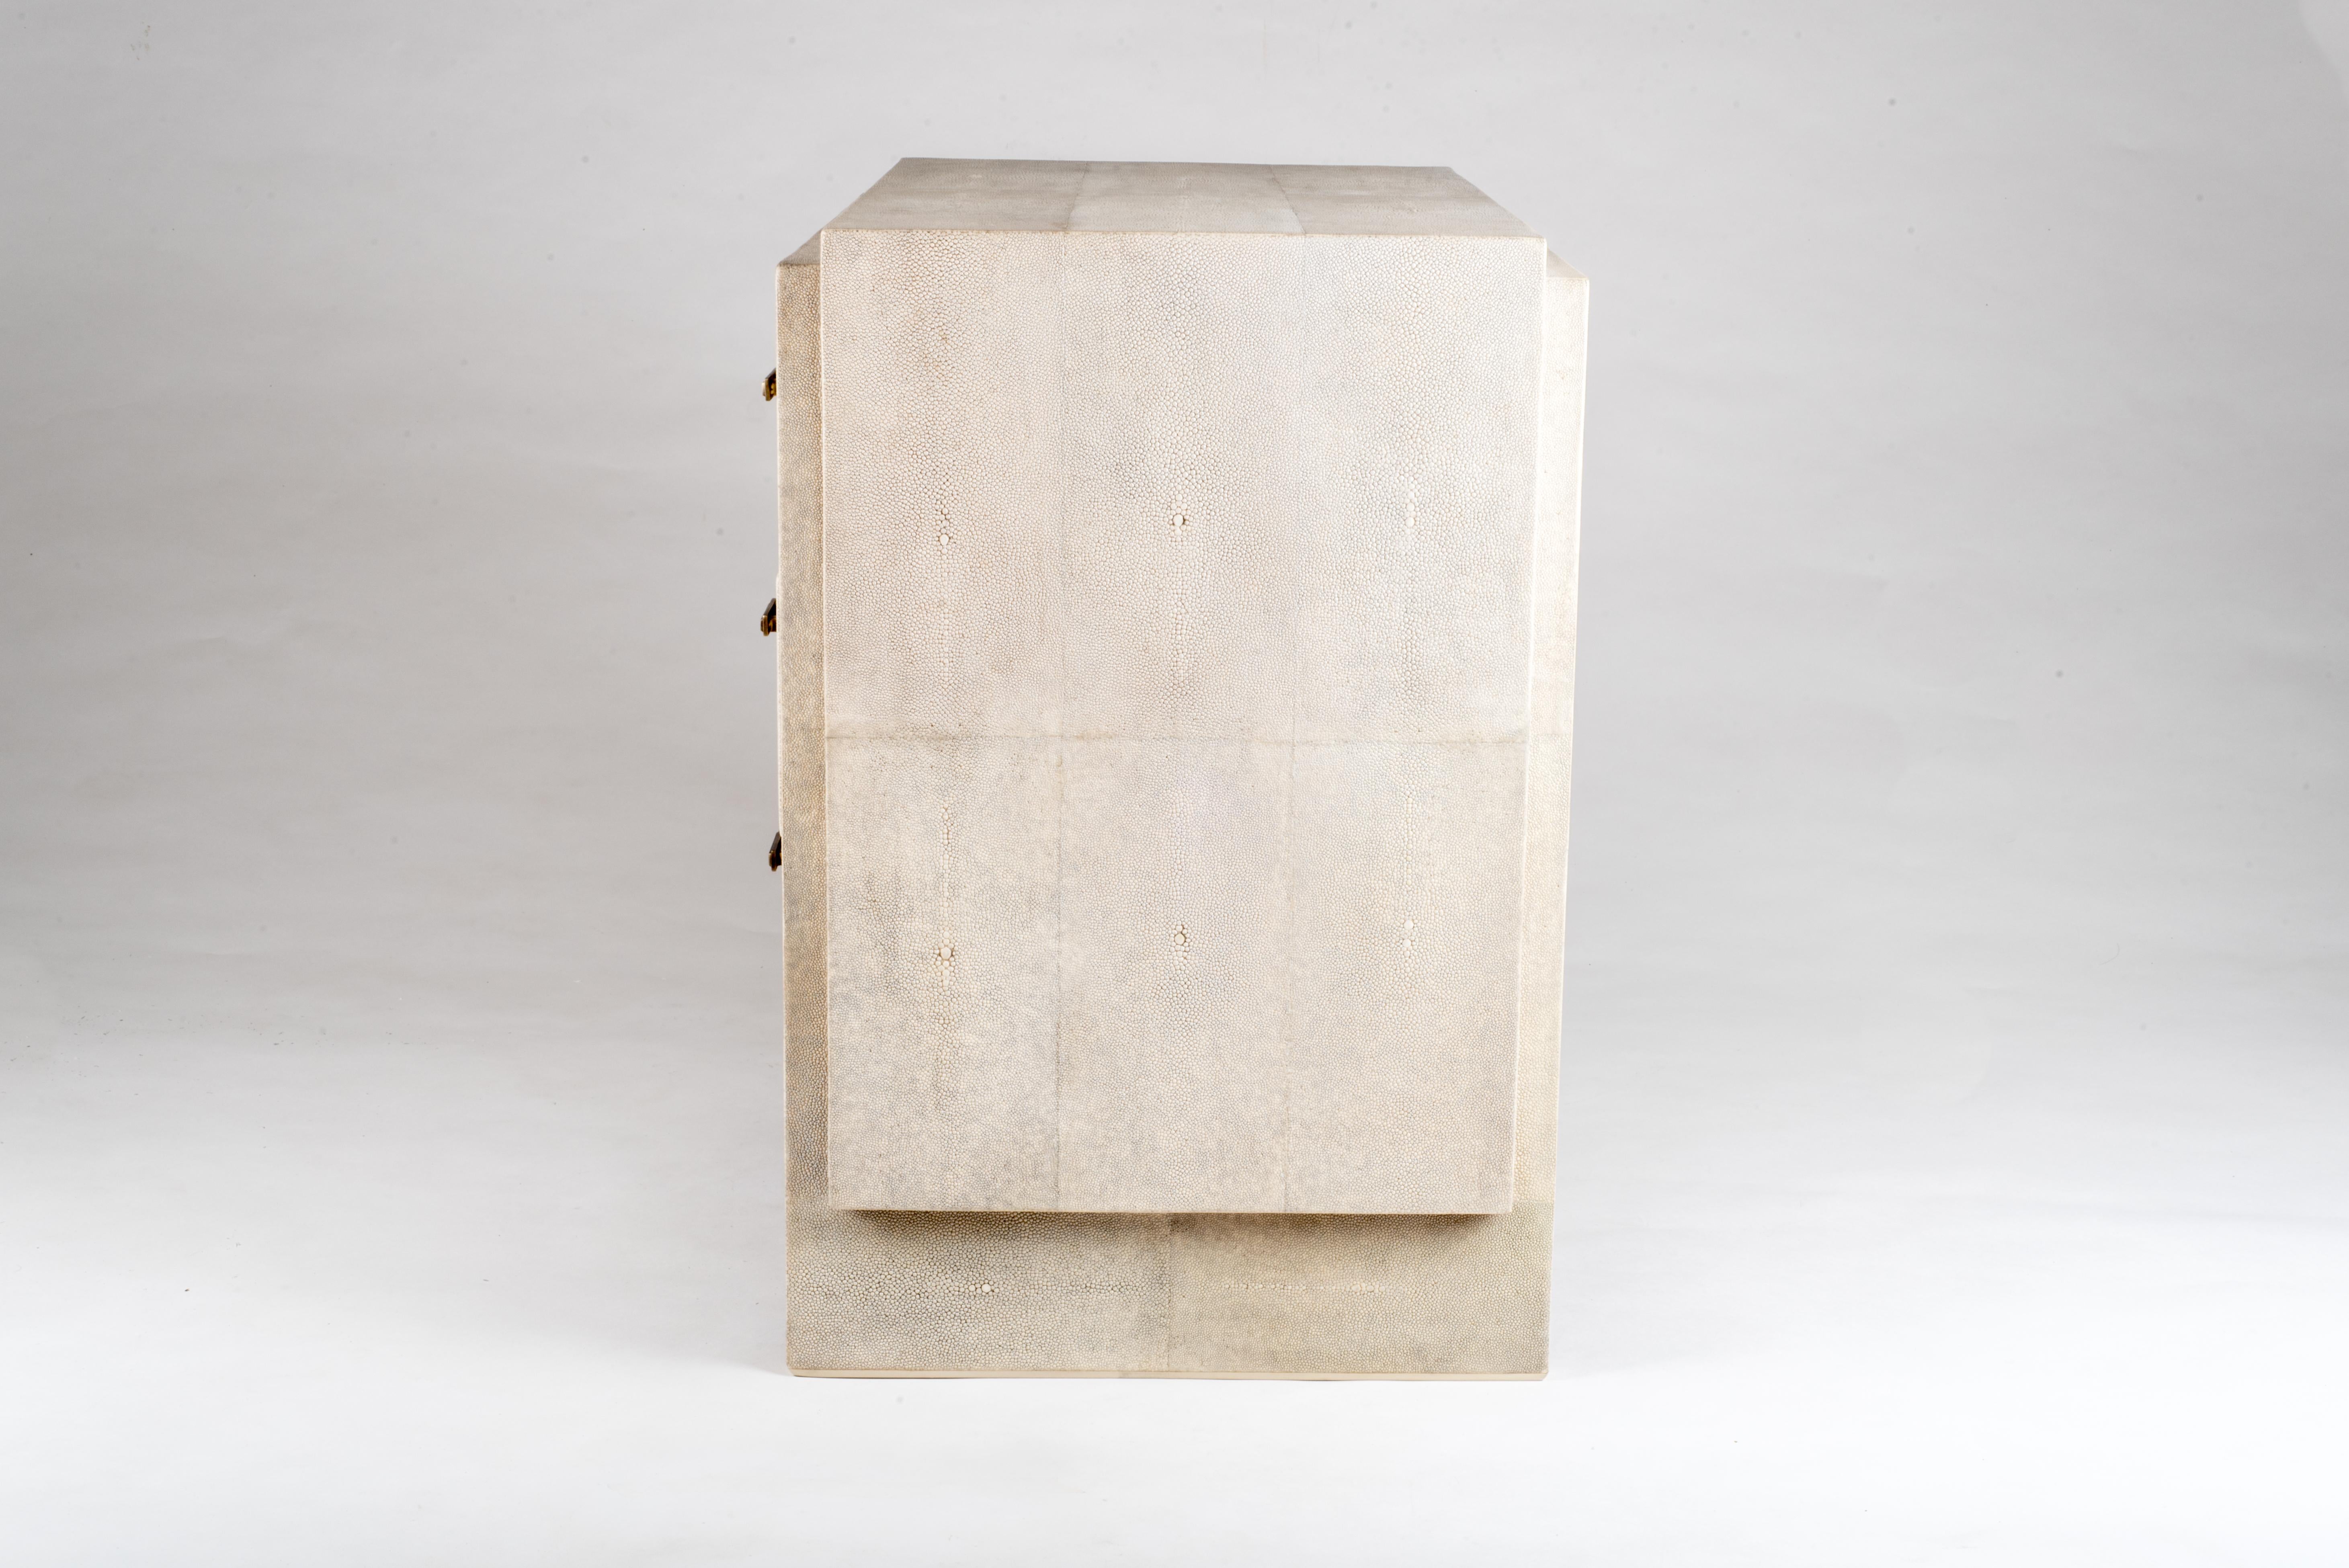 Shagreen Stingray Iconic Chest of Drawers with Beveled Drawers in Cream Shagreen by R&Y Augousti For Sale